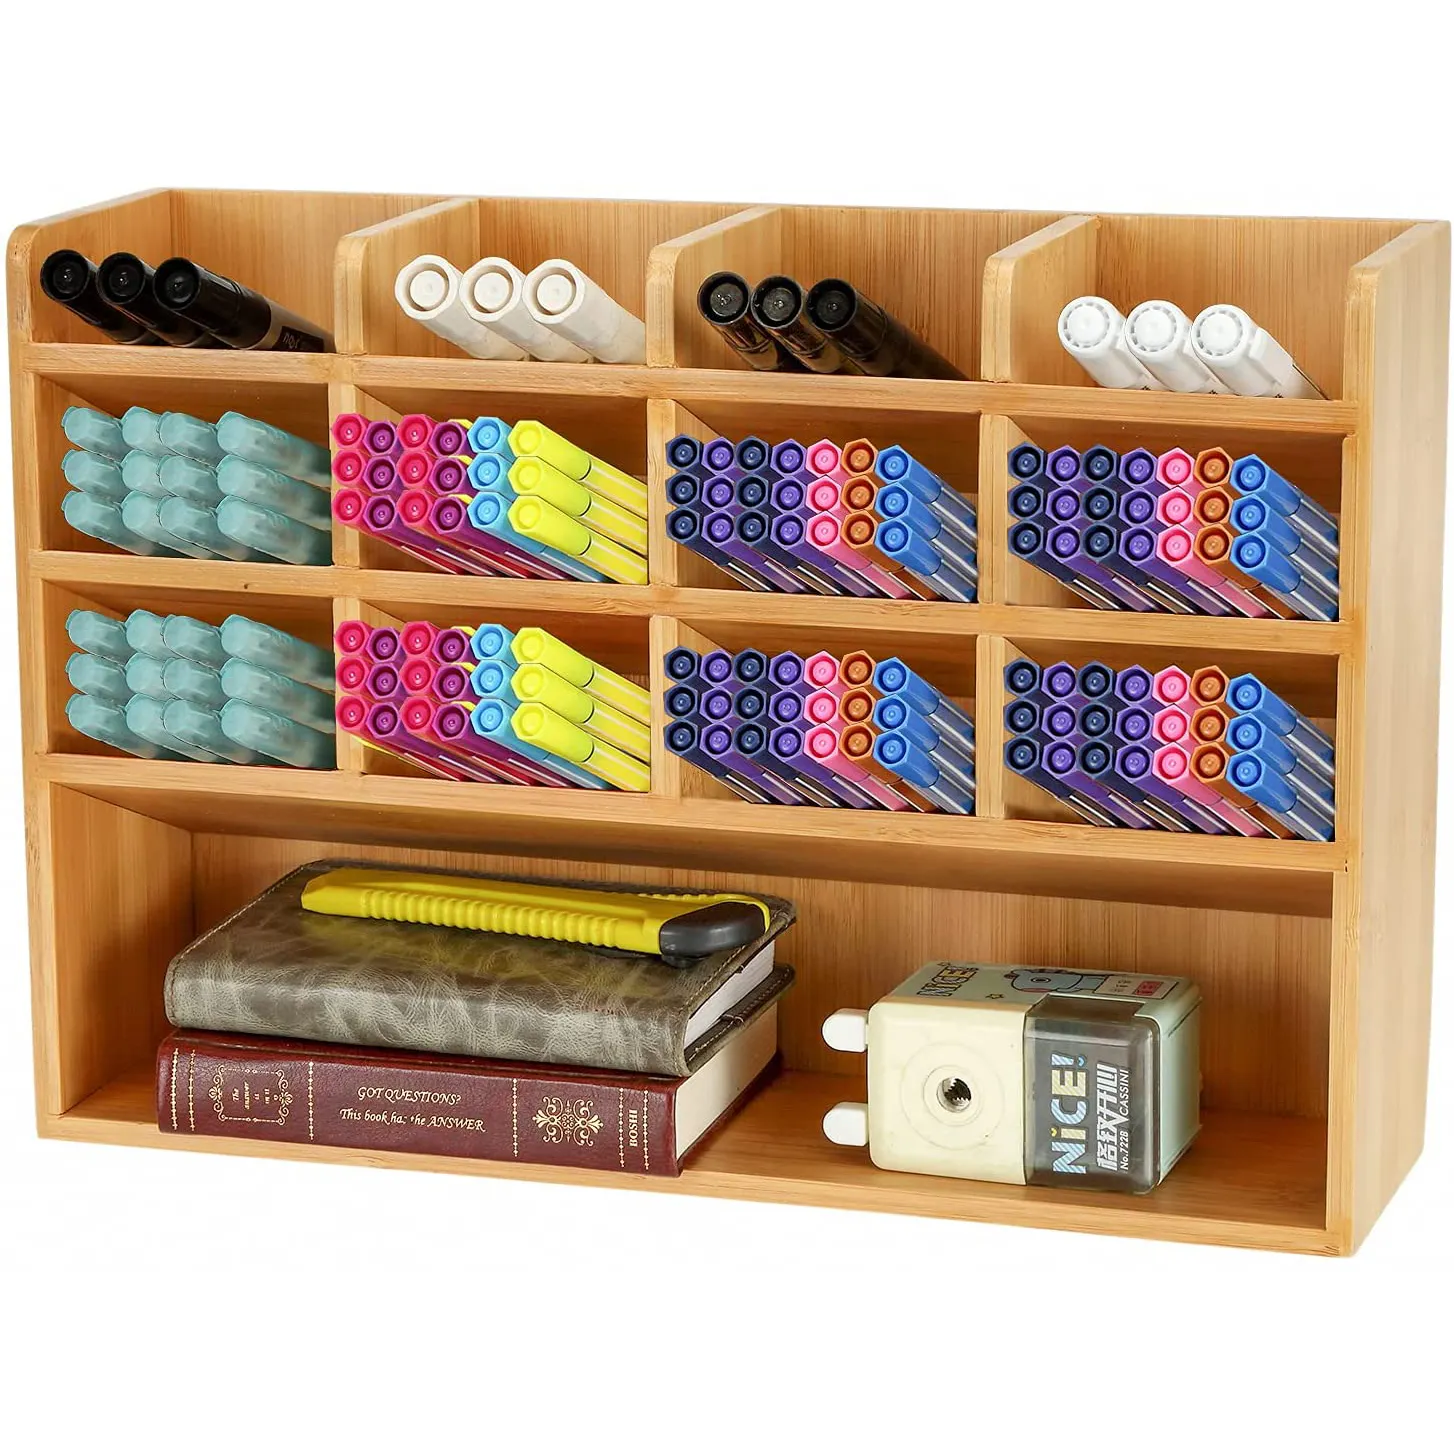 Bamboo Pen Organizer Wooden Pencil Holder Box for Desk Wood Art Supplies Storage Cabinet with 13 Compartments for Colored Pencil